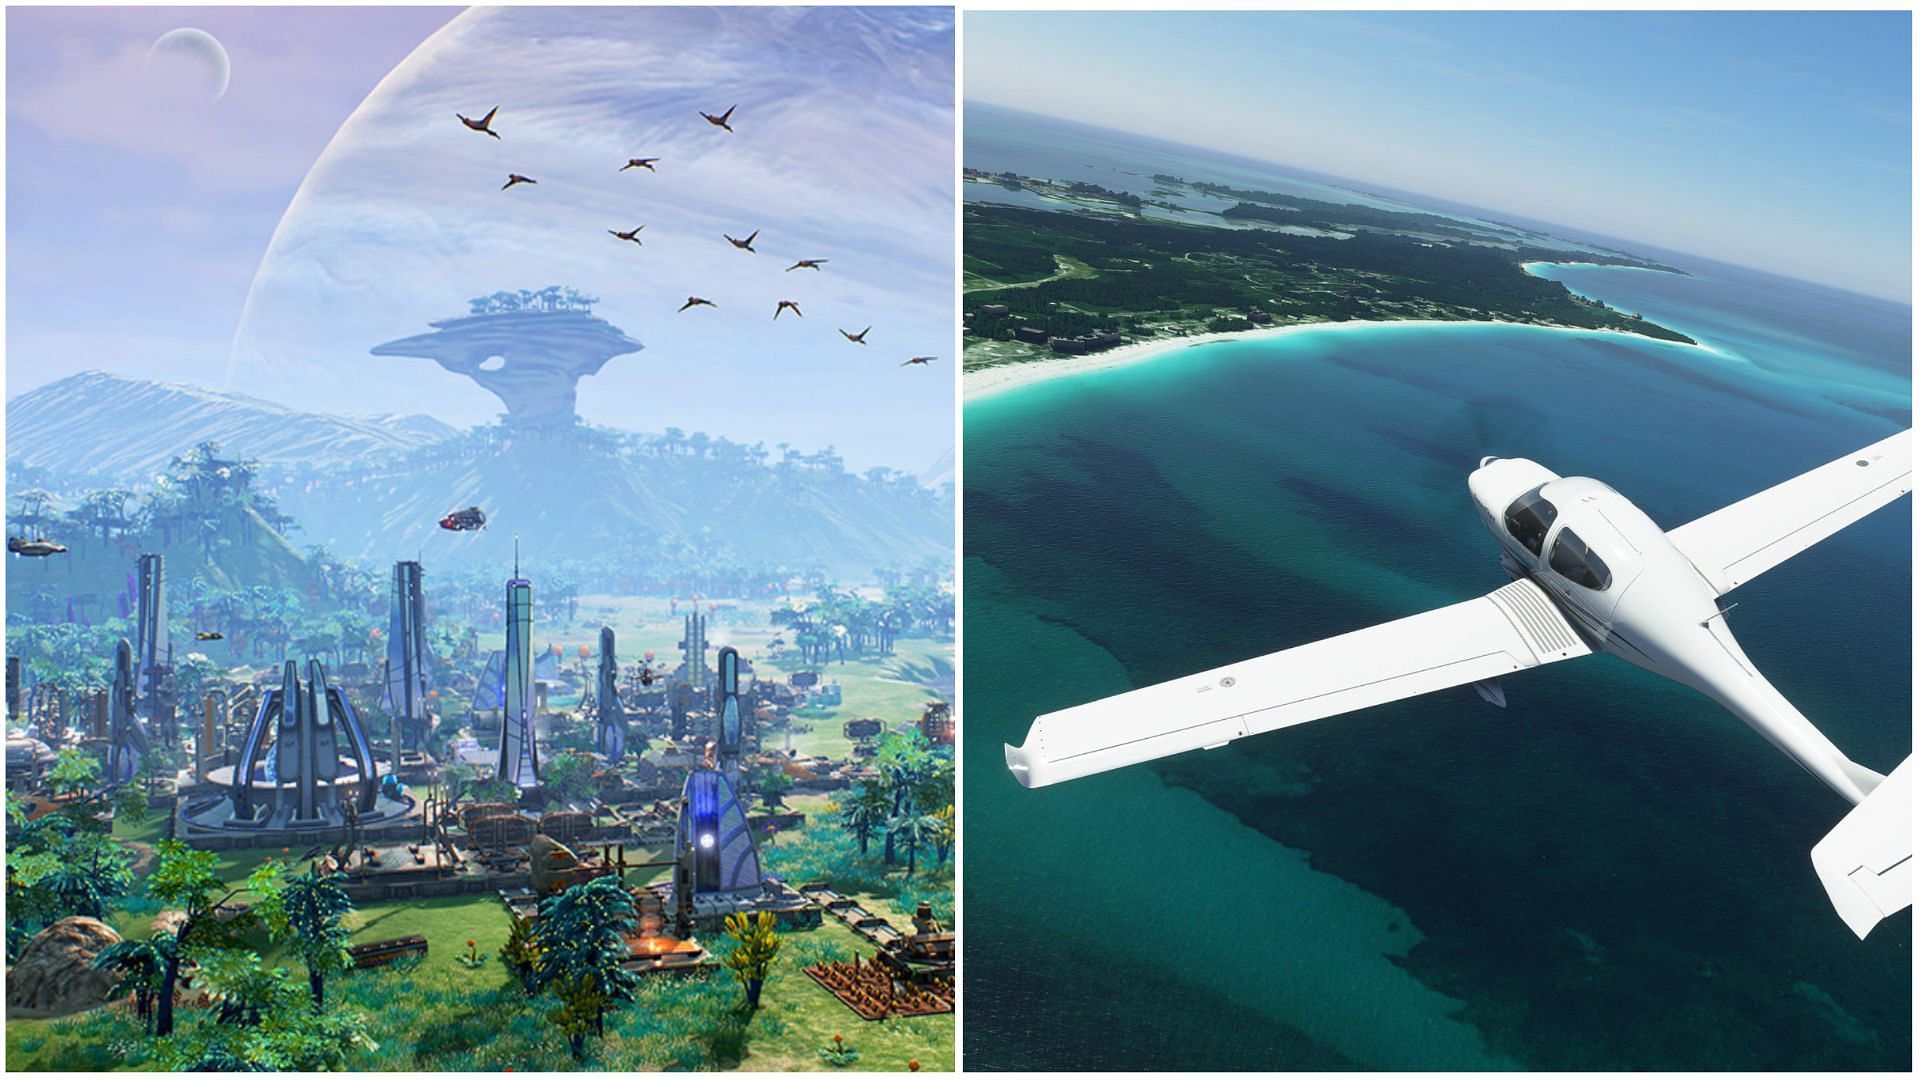 Aven Colony and Microsoft Flight Simulator are relaxing video games that players can get into this month (Image via Team 17 &amp; Xbox Game Studios)